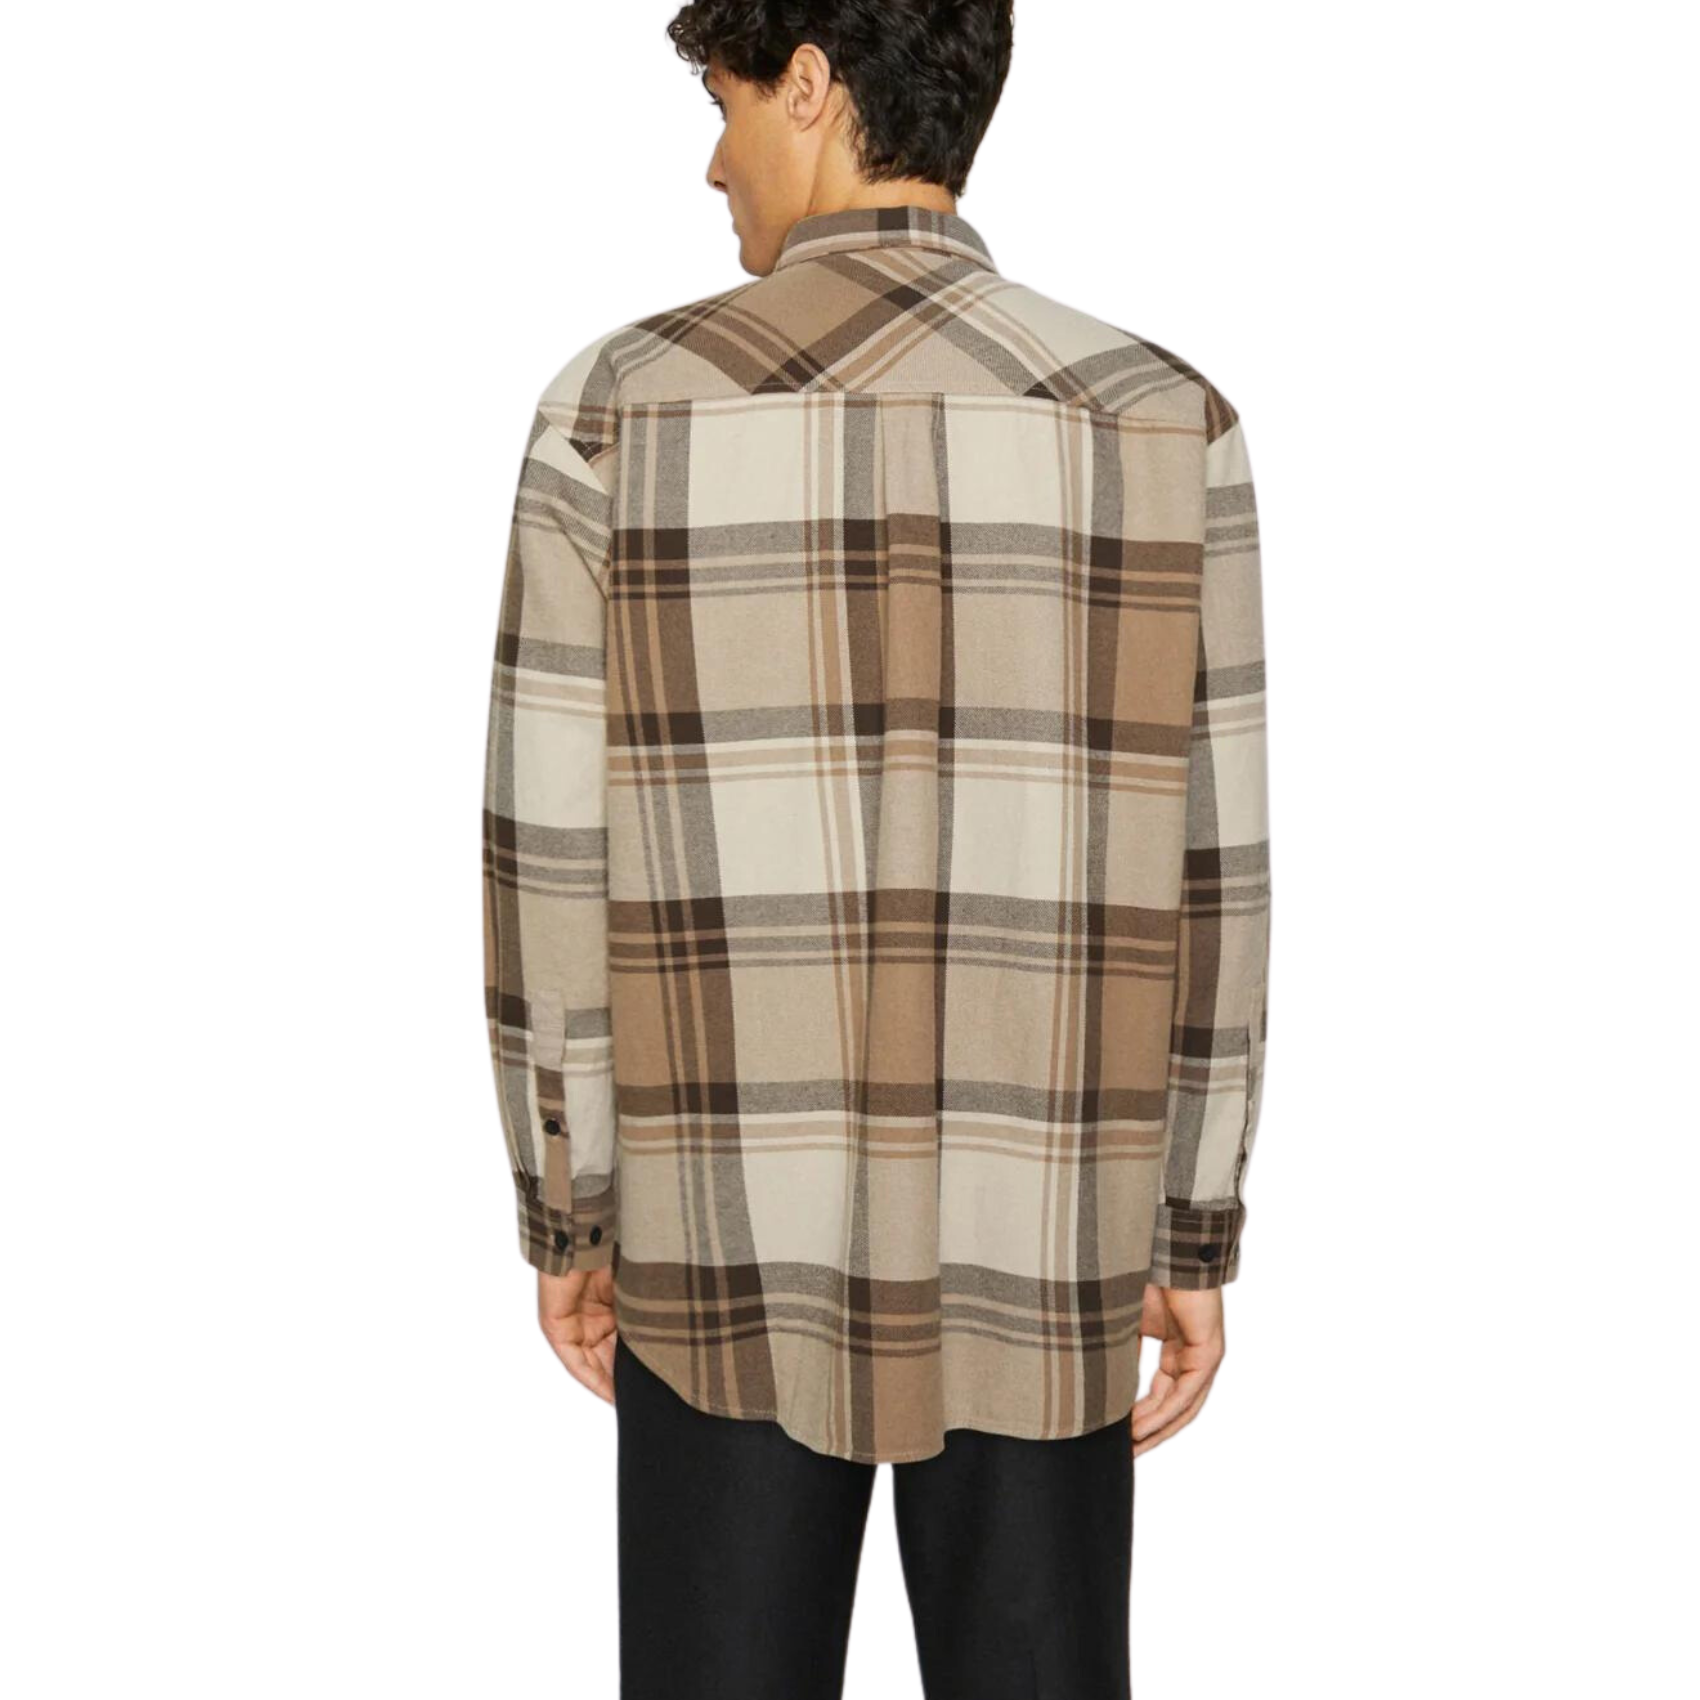 State Worker Shirt - Brown